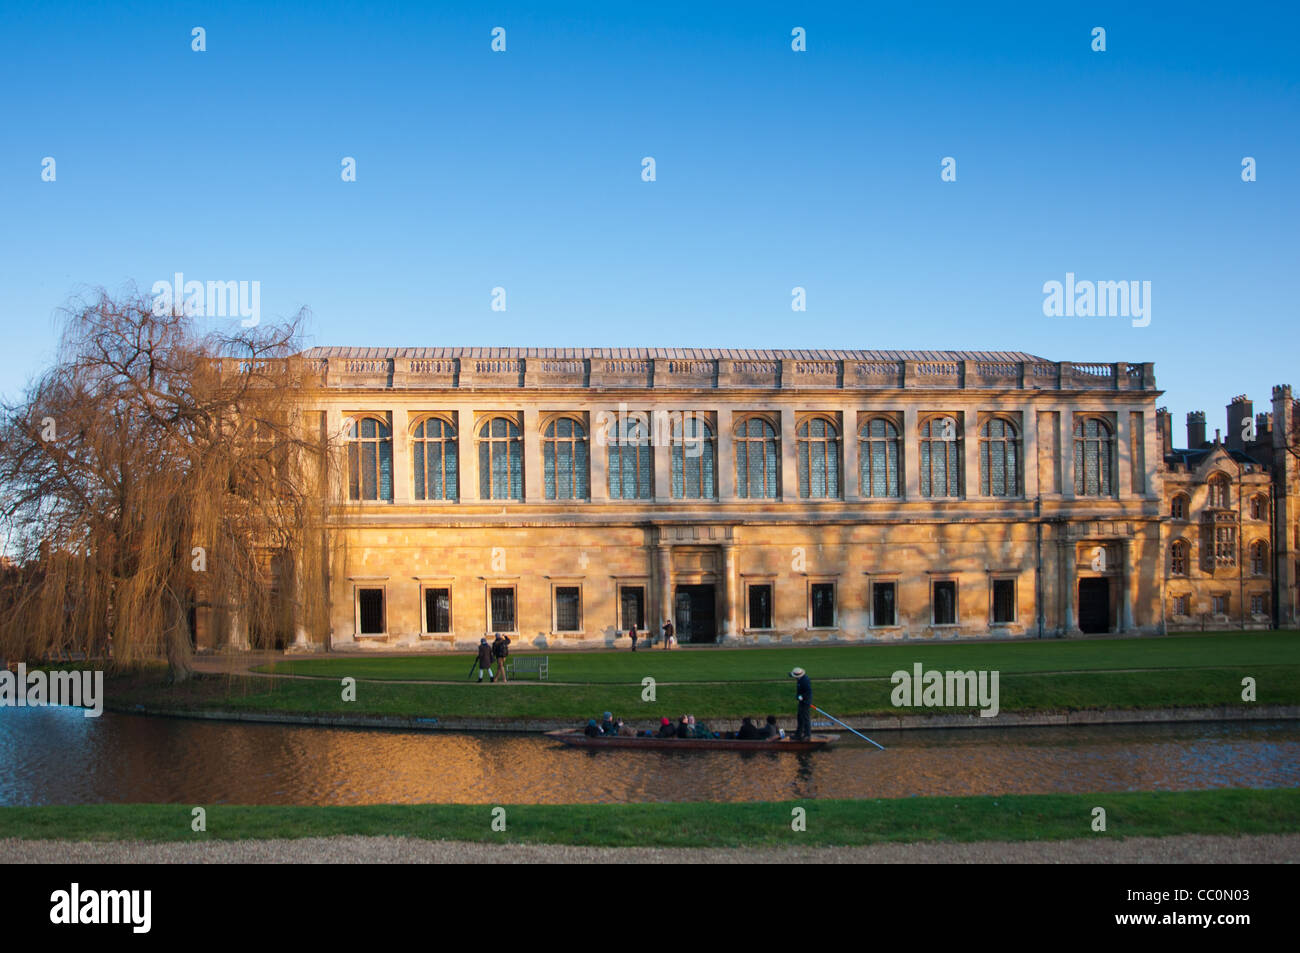 The Wren Library at sunset, Trinity College Cambridge, with punting in front on the river Cam, UK Stock Photo